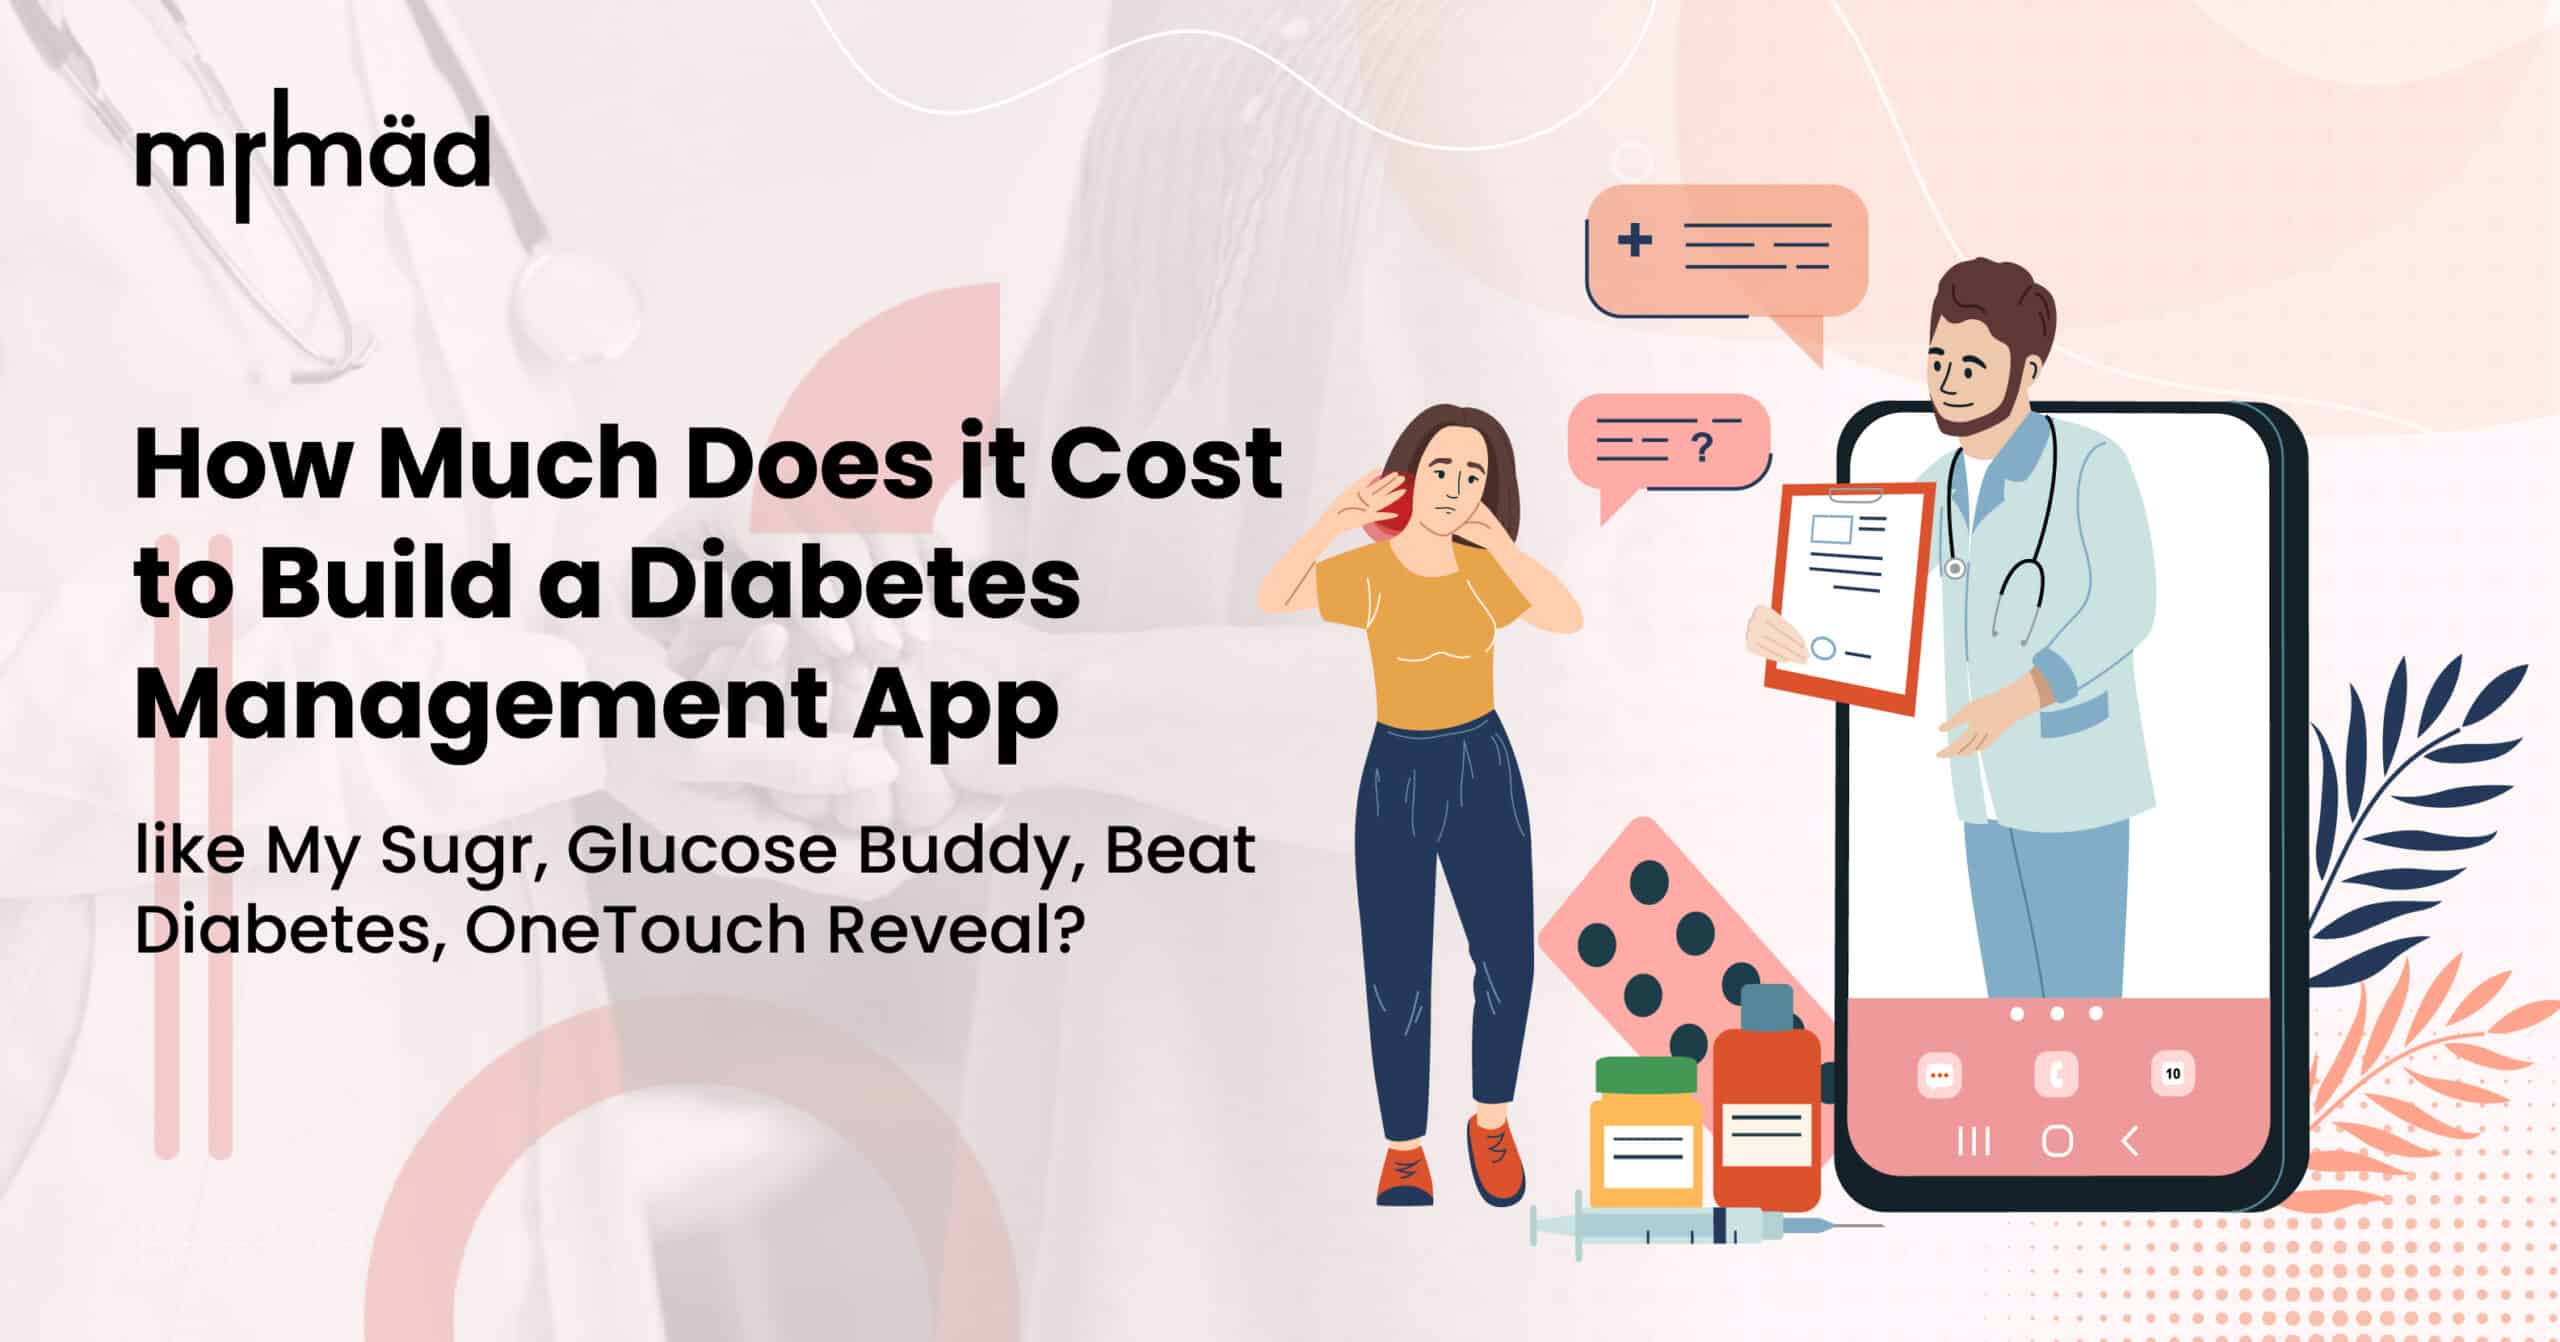 Cost to Build a Diabetes Management